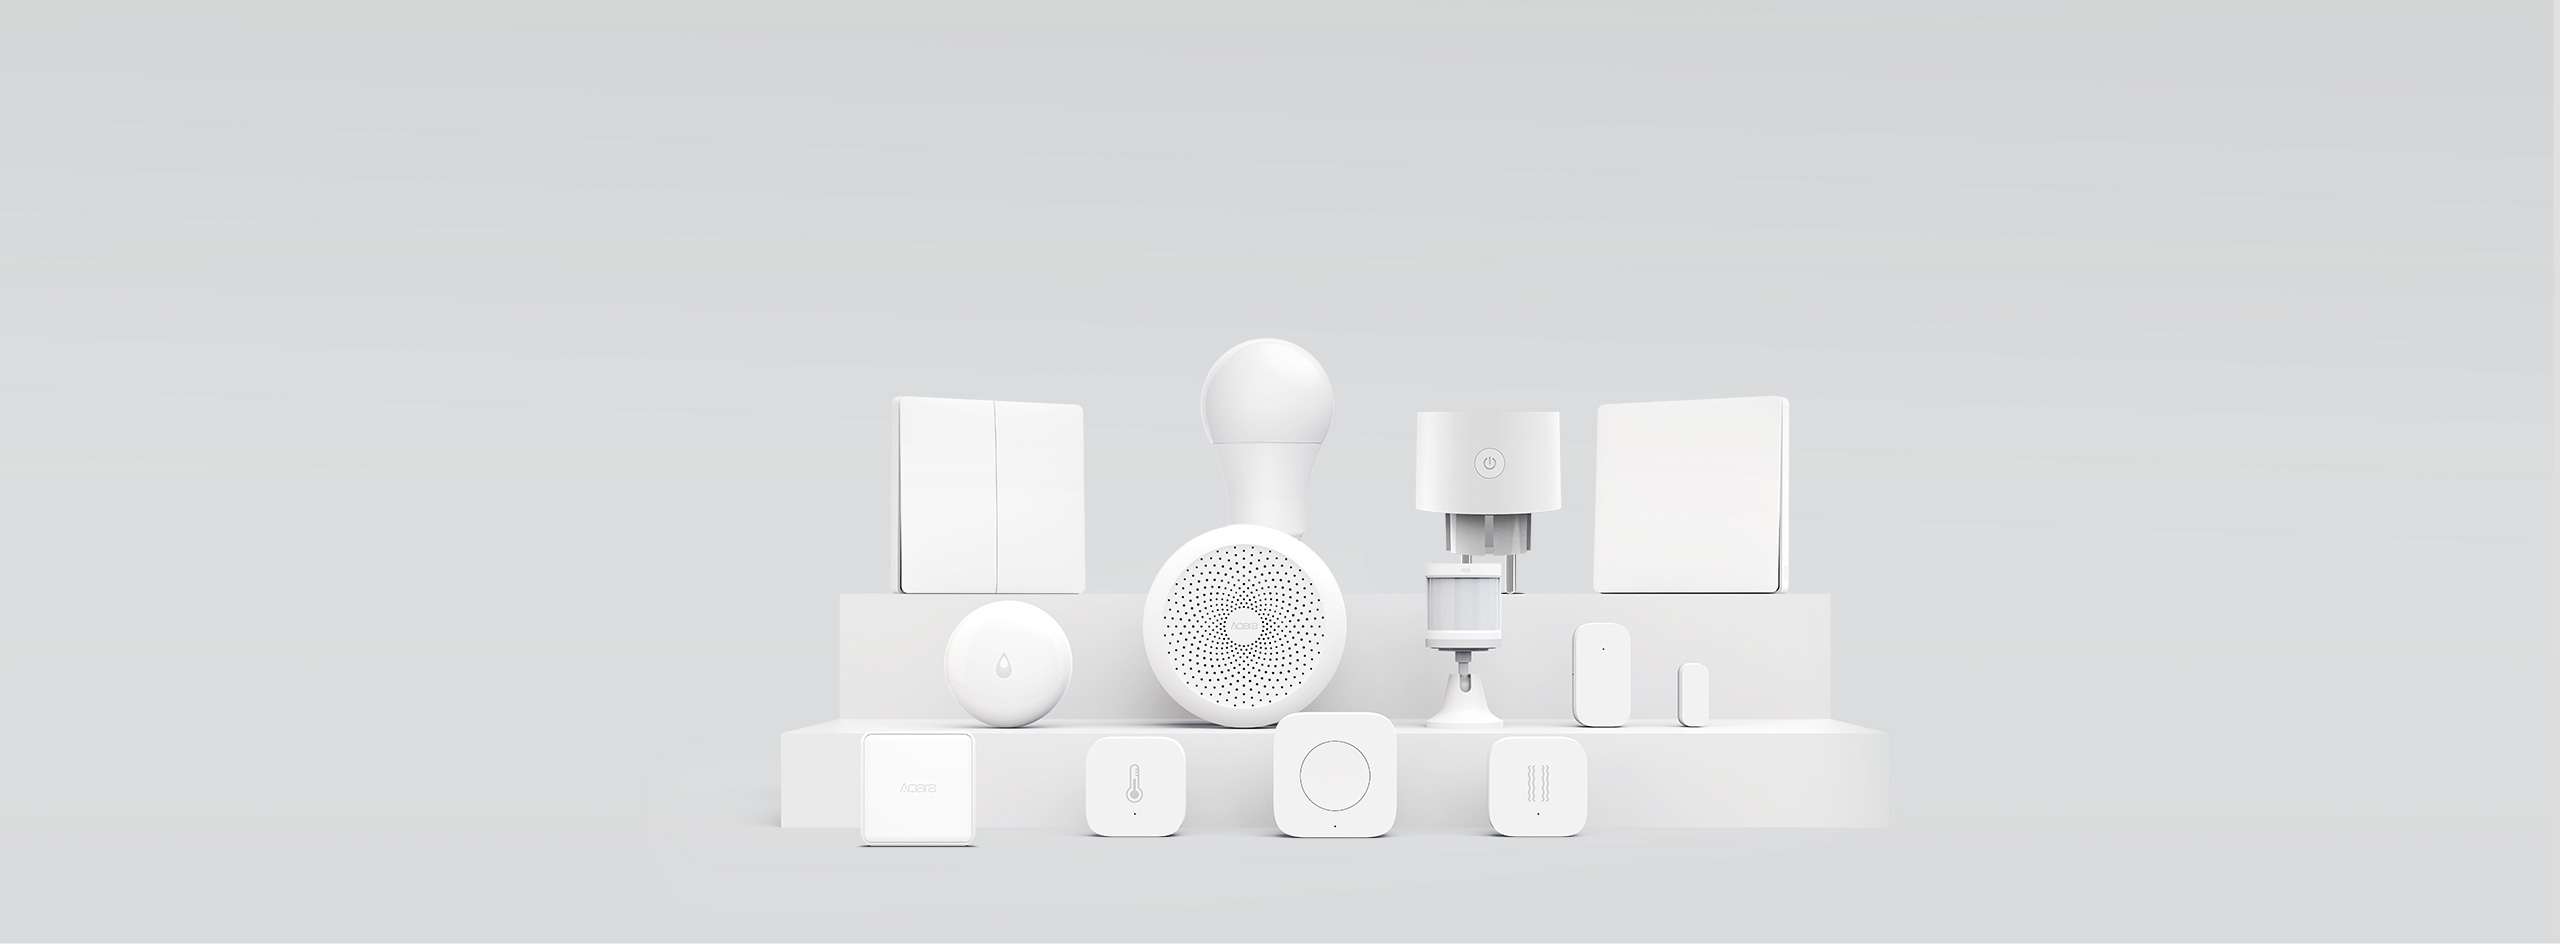 Full range of smart home devices from Aqara